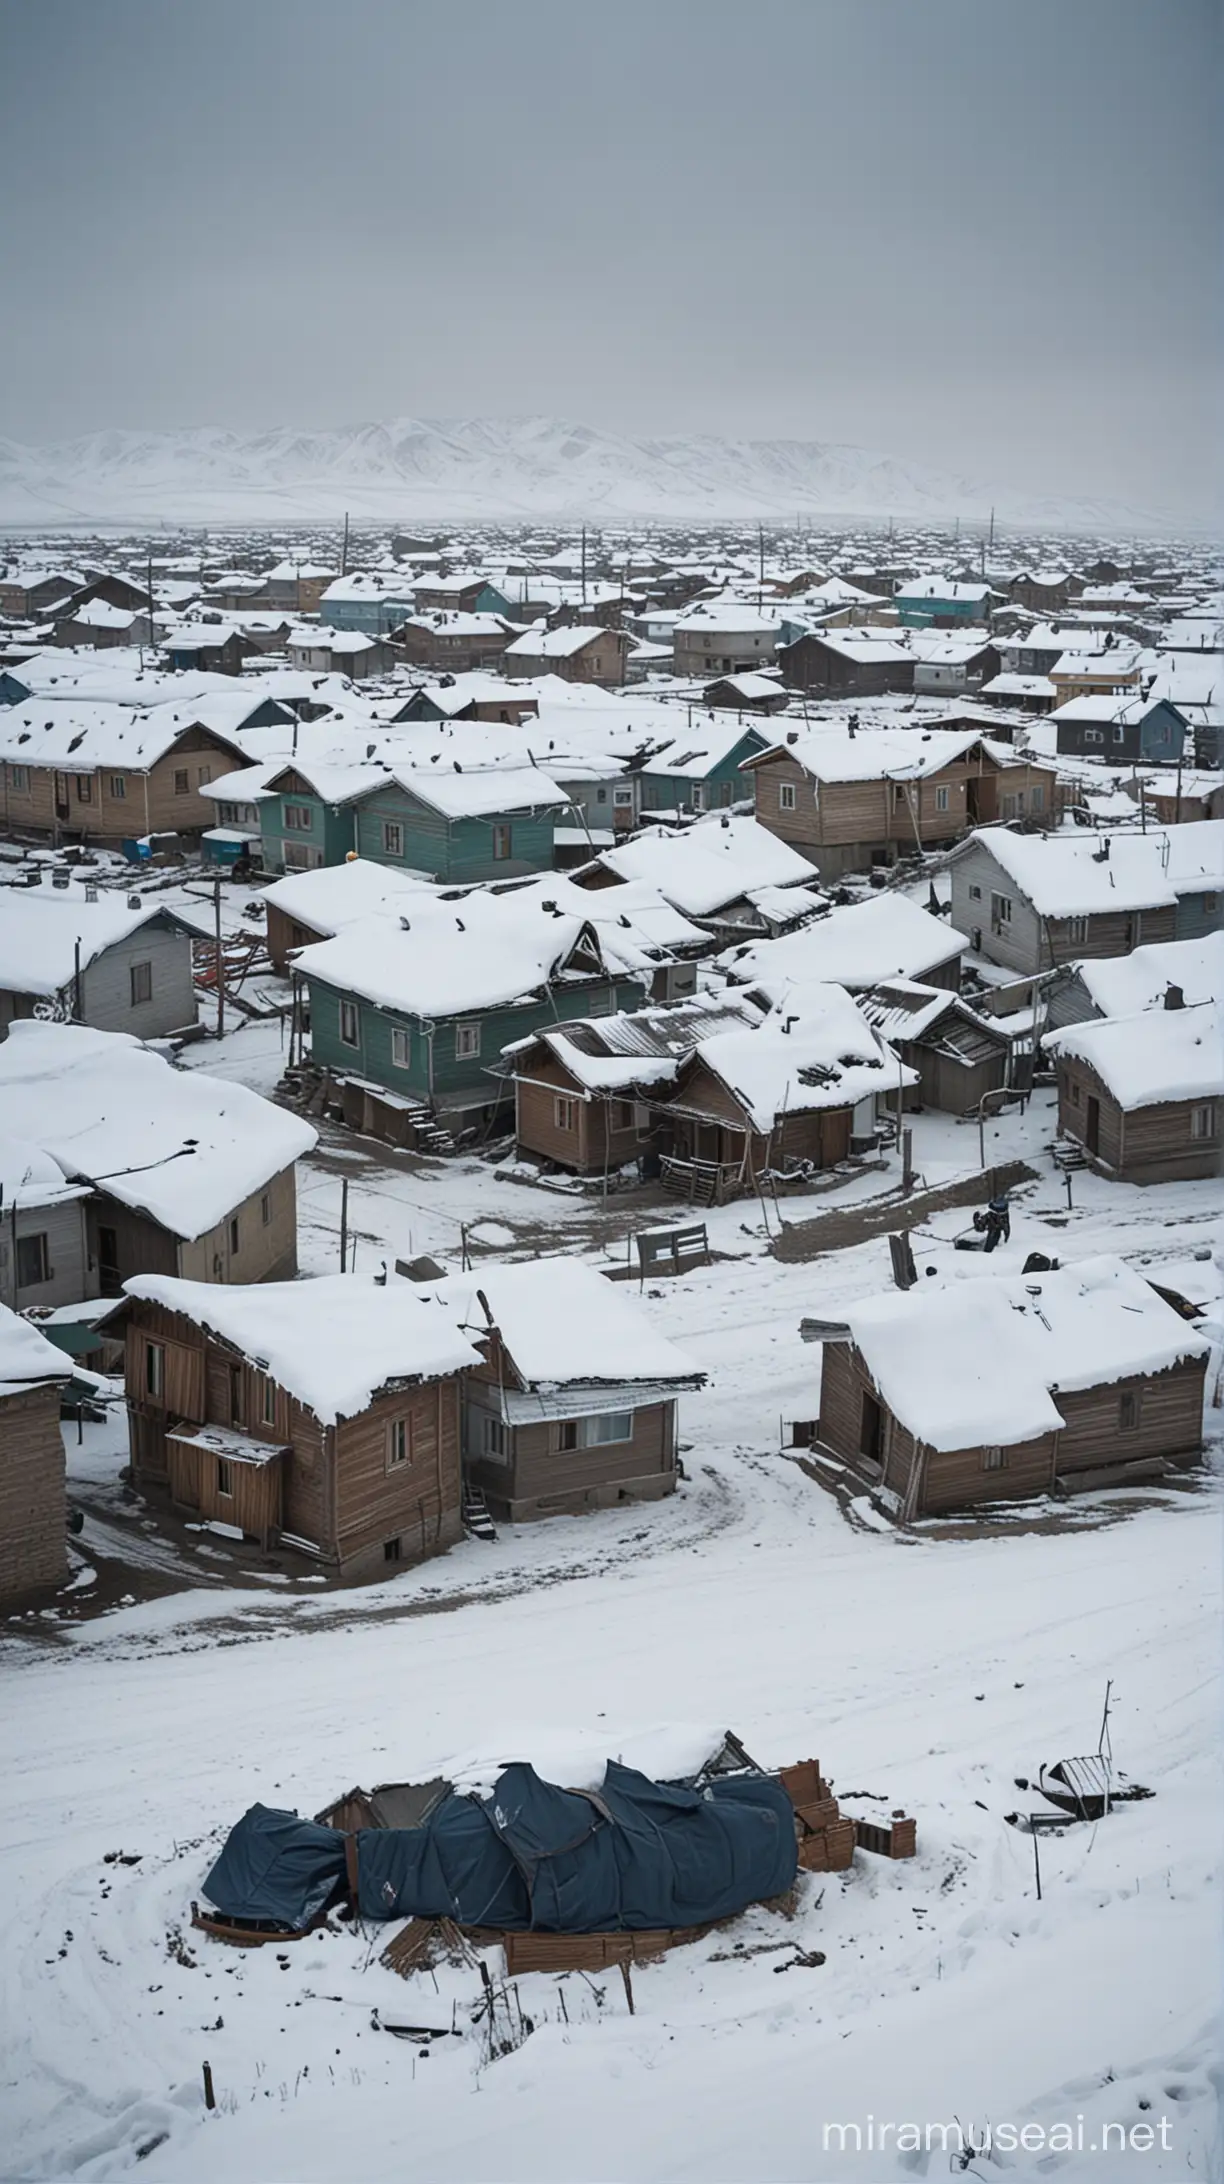 The visual could focus on the mysterious sleep disorder in the villages of Kalanchi and Krasnogorsk in Kazakhstan. It may depict various scenes illustrating the effects of this disorder: people suddenly falling asleep, lying on the streets, or struggling with fatigue and dizziness. Wintry landscapes depicting snow-covered houses and streets could add a mysterious atmosphere.

